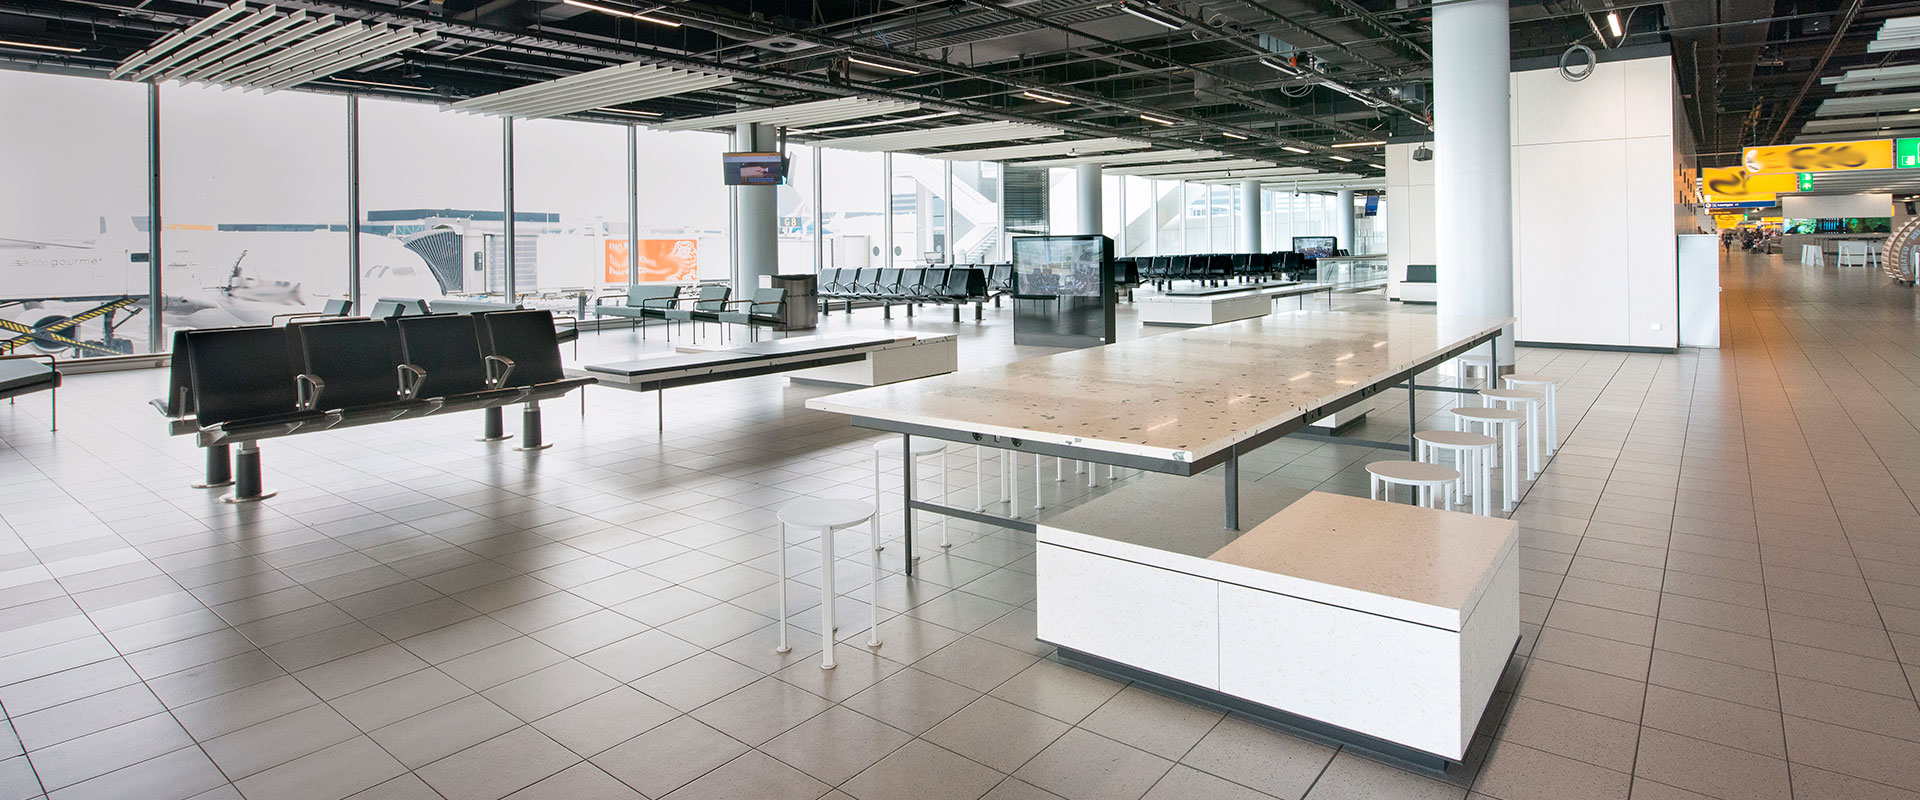 AGGLOTECH-progetto-schiphol-airport-slider-3